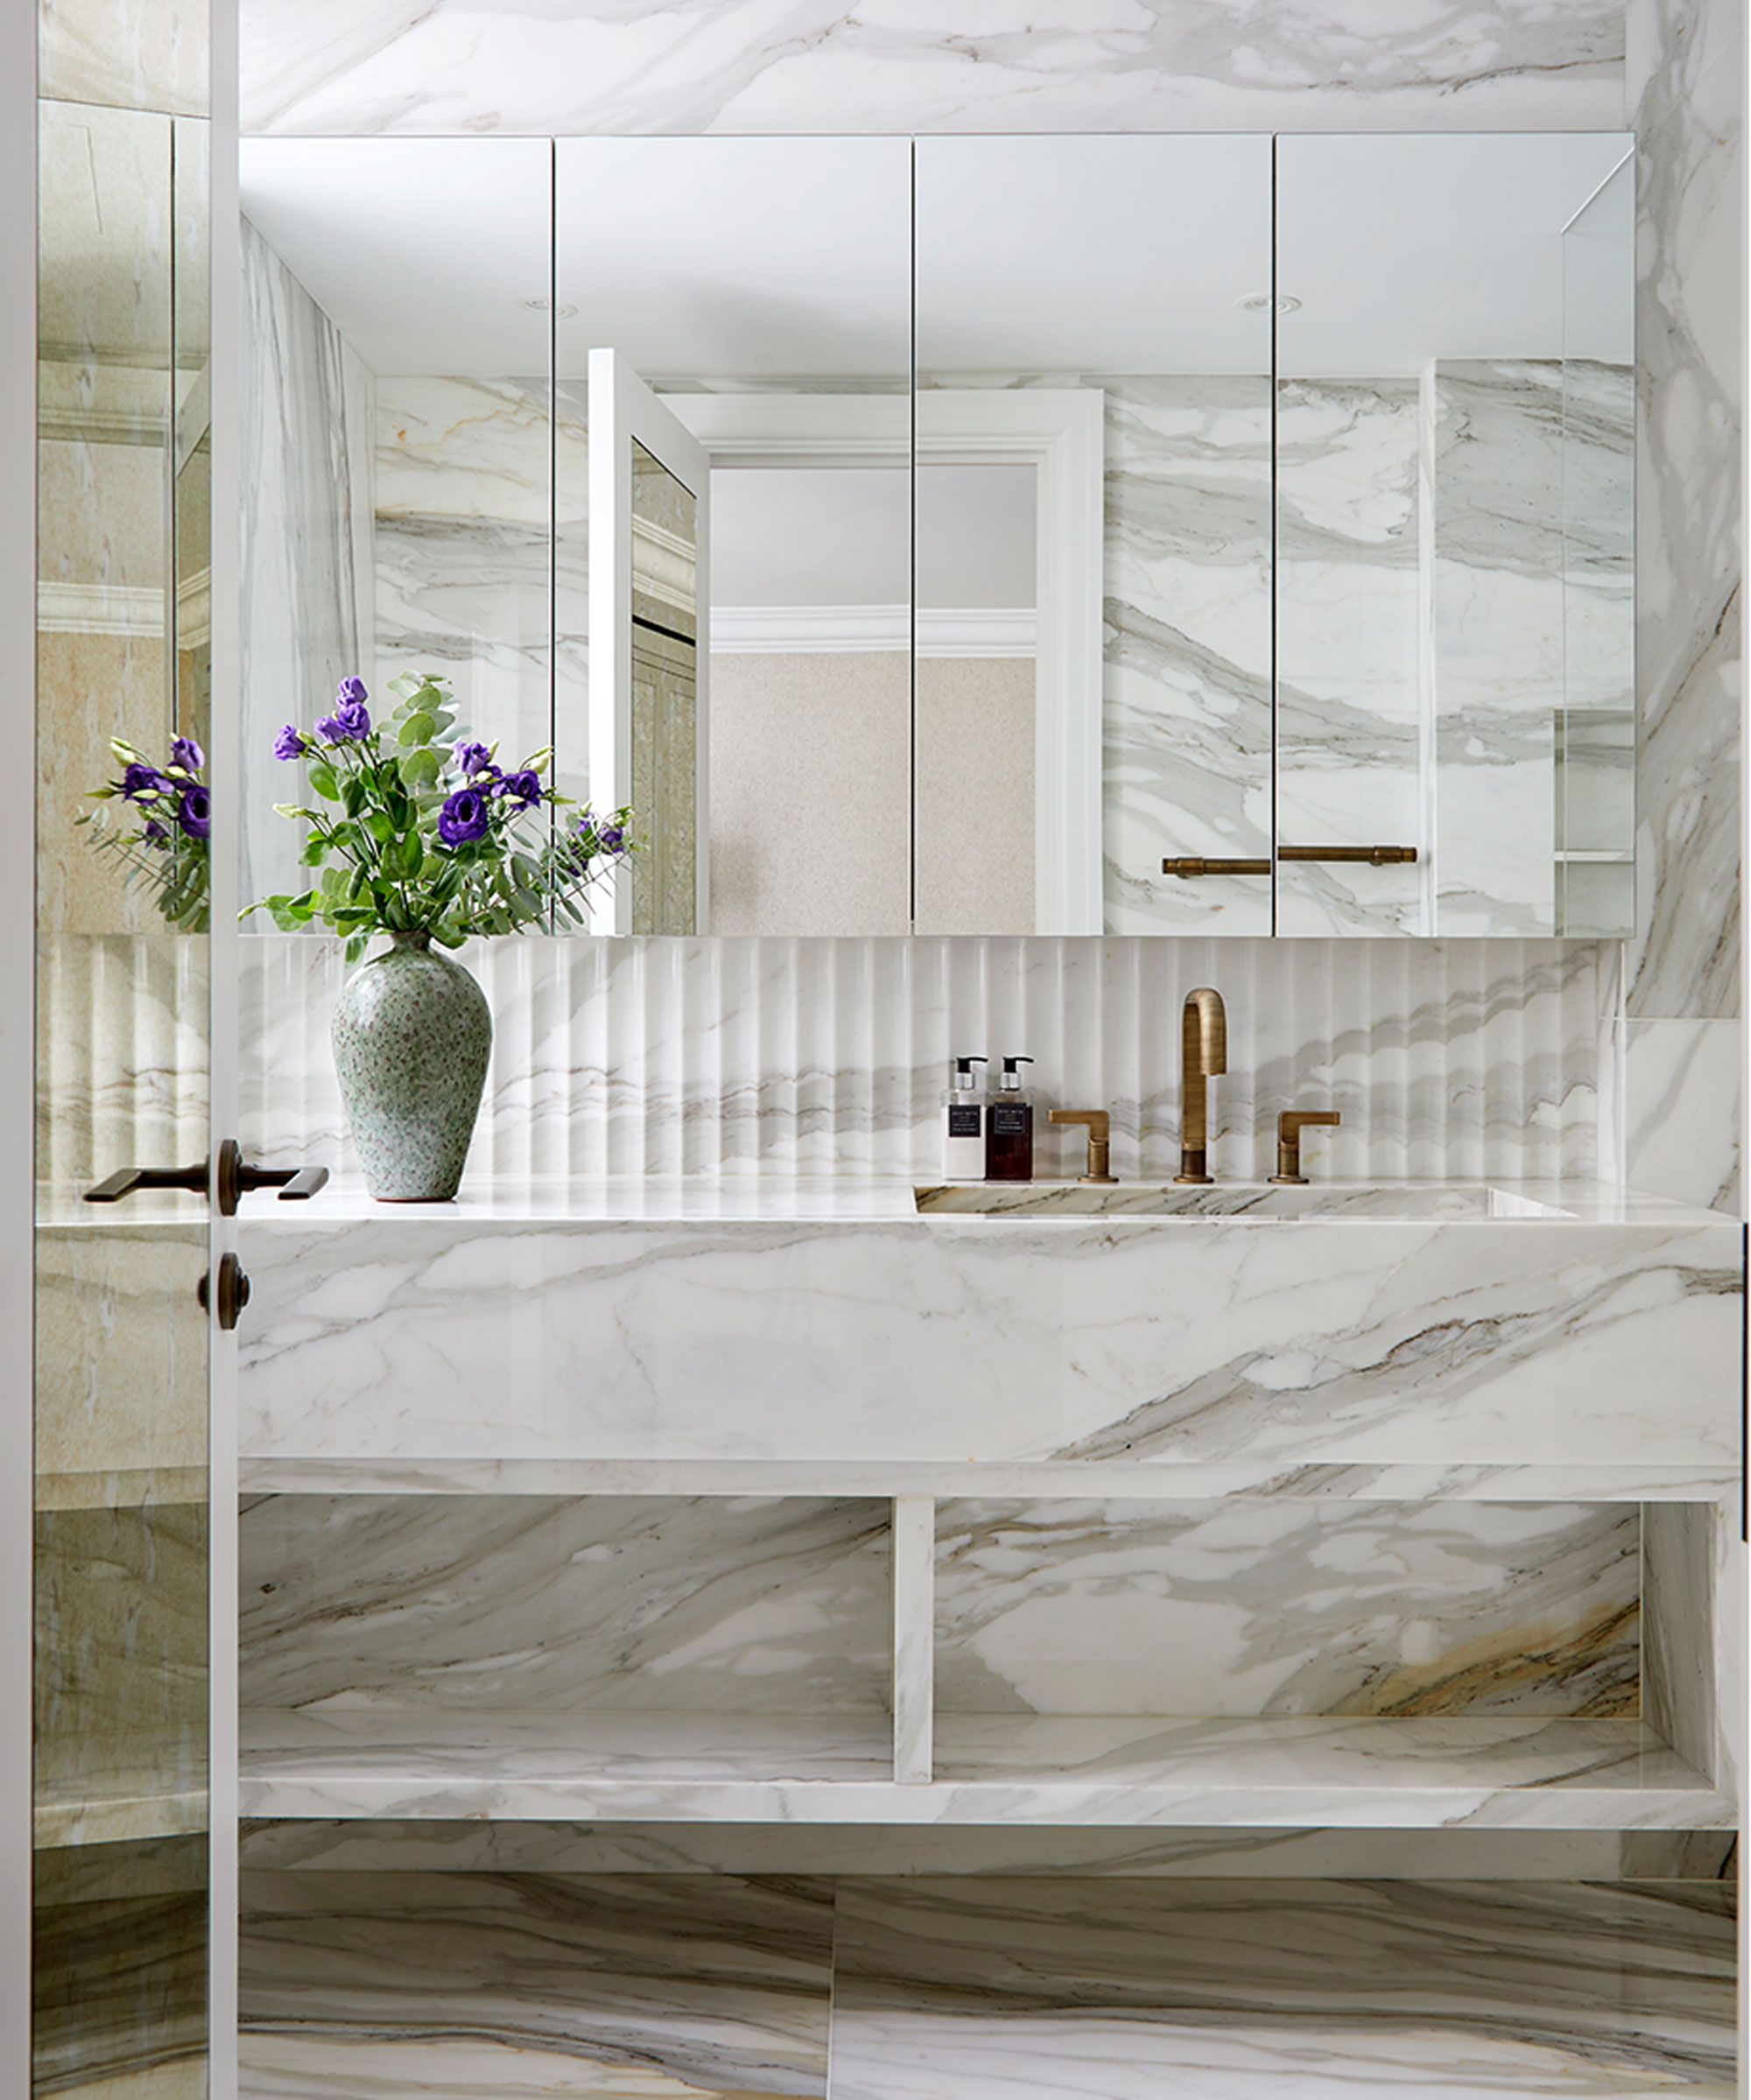 Mayfair apartment with marble bathroom and wash stand